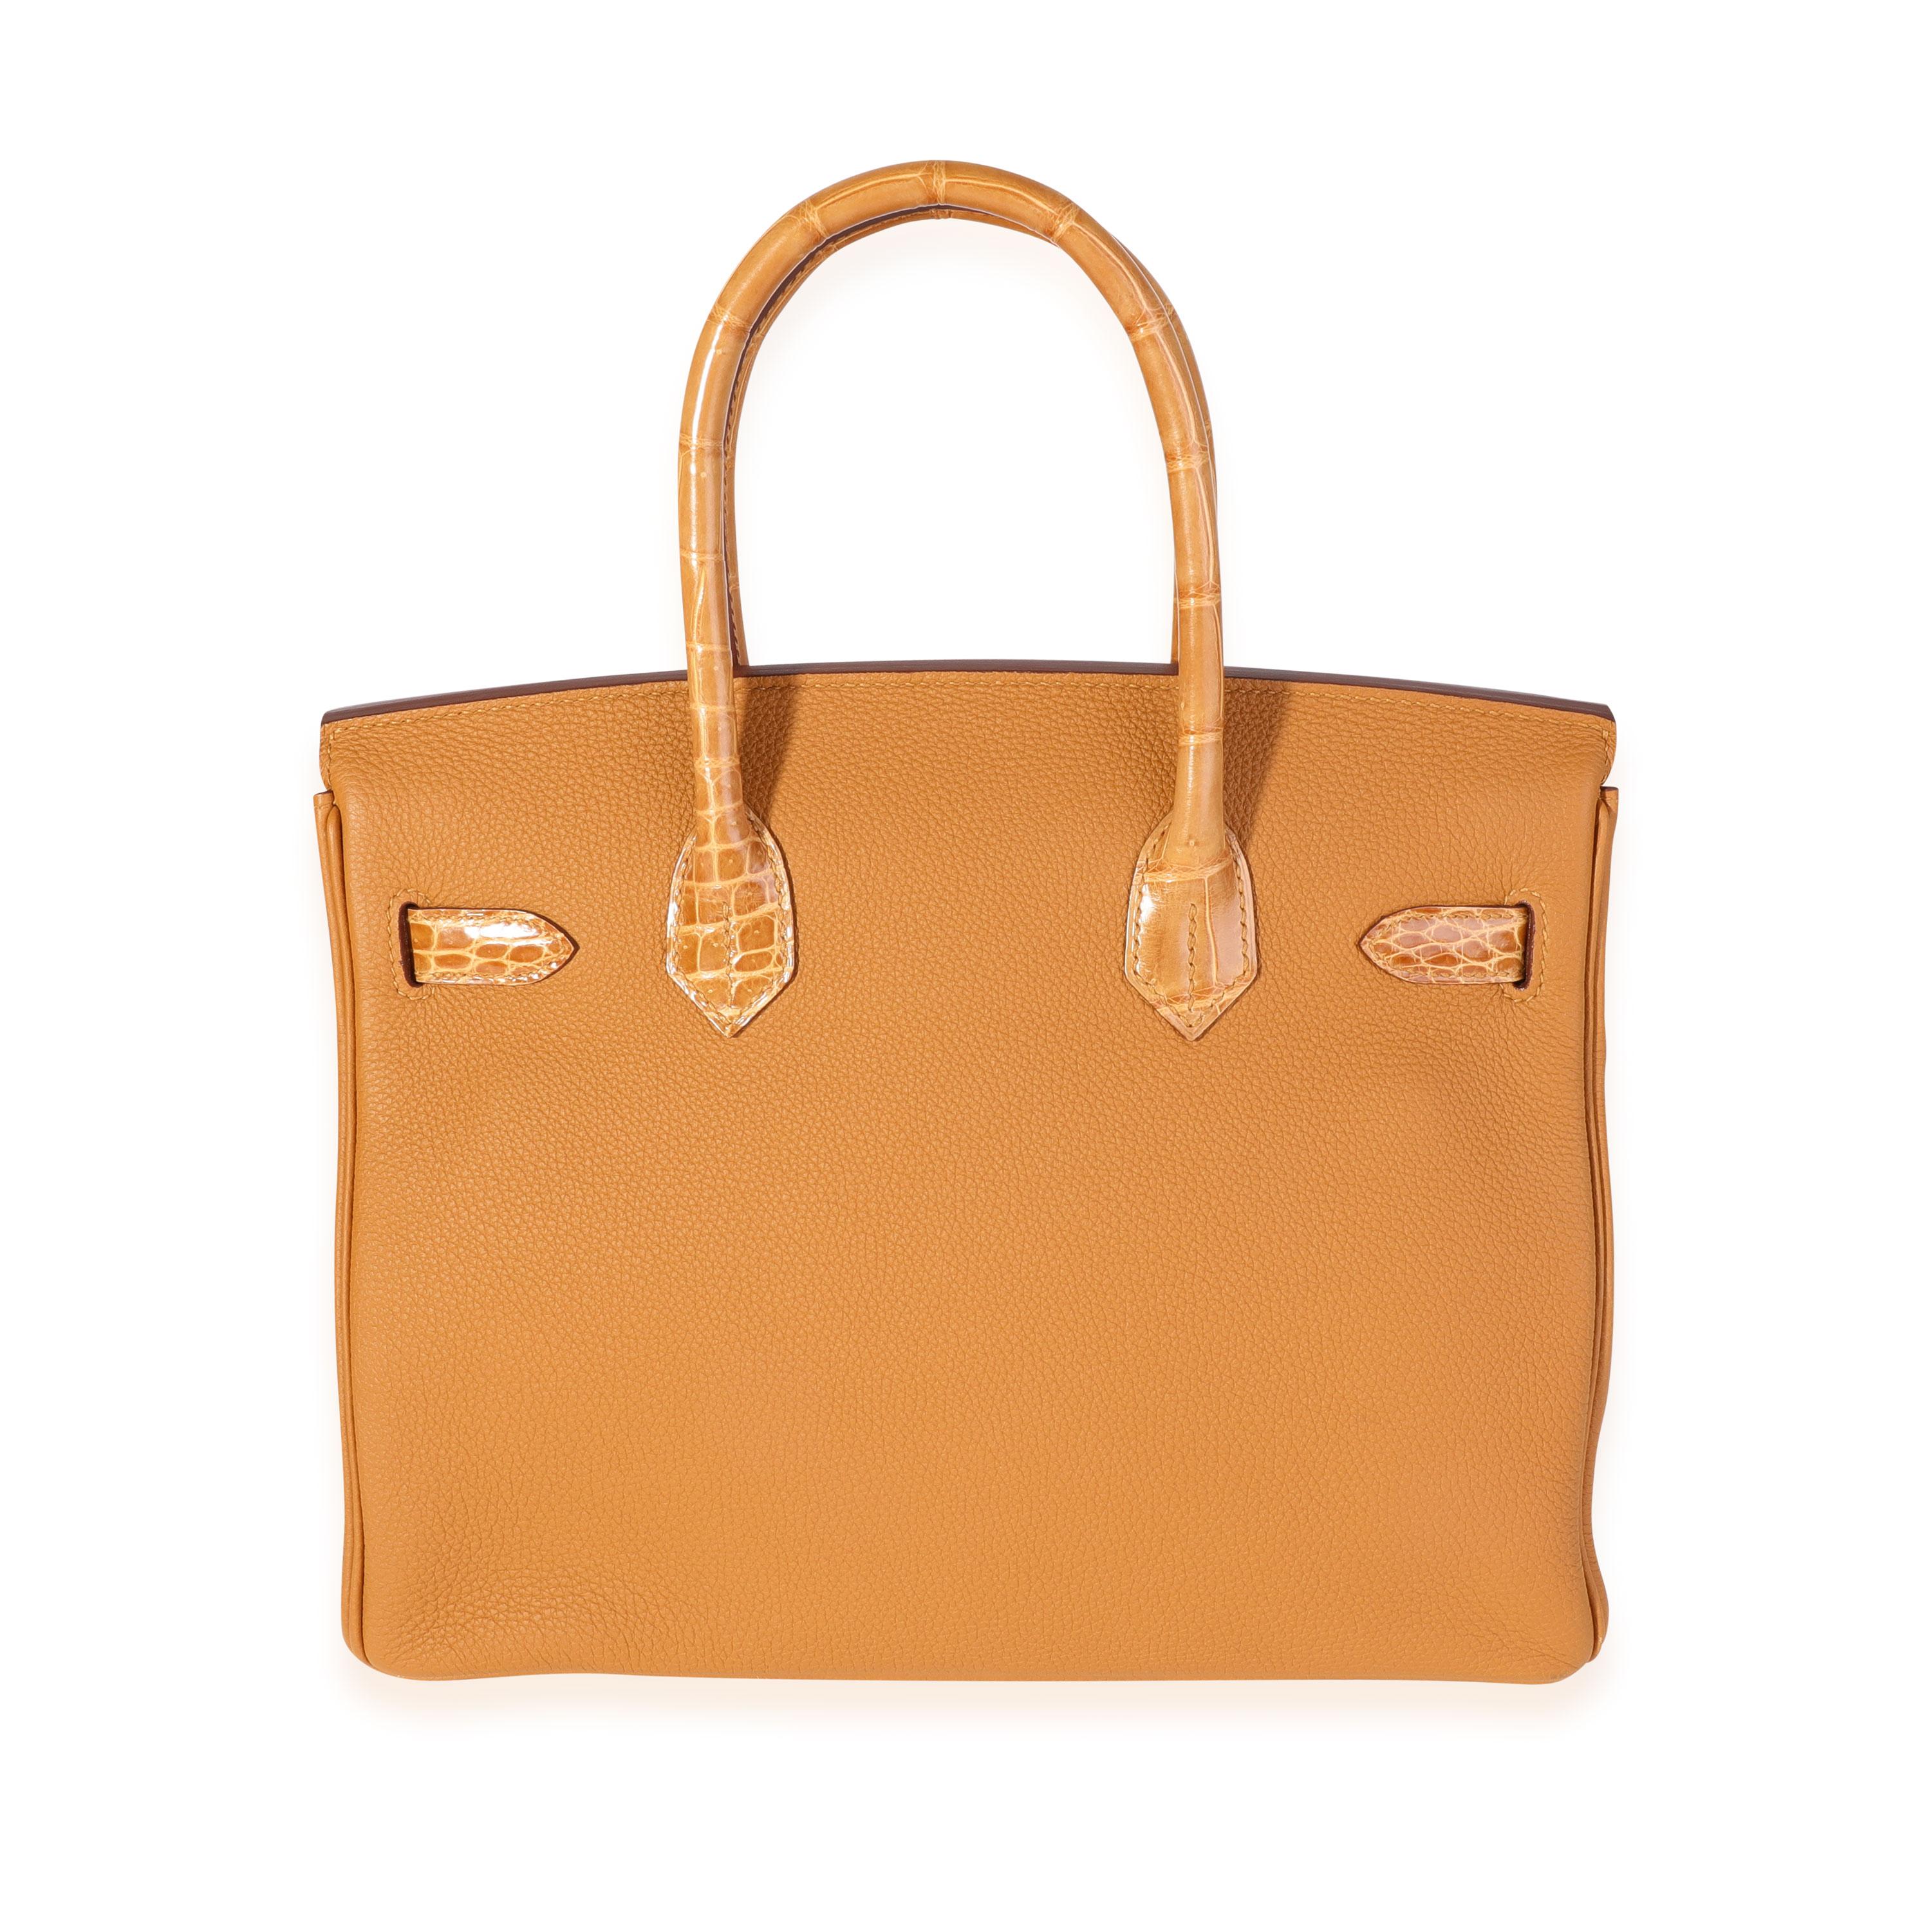 Listing Title: Hermès Caramel Tabac Shiny Niloticus Crocodile & Togo Touch Birkin 30 GHW
SKU: 119830
Condition: Pre-owned (3000)
Handbag Condition: Very Good
Condition Comments: Very Good Condition. Plastic on hardware. Scuffing and discoloration to